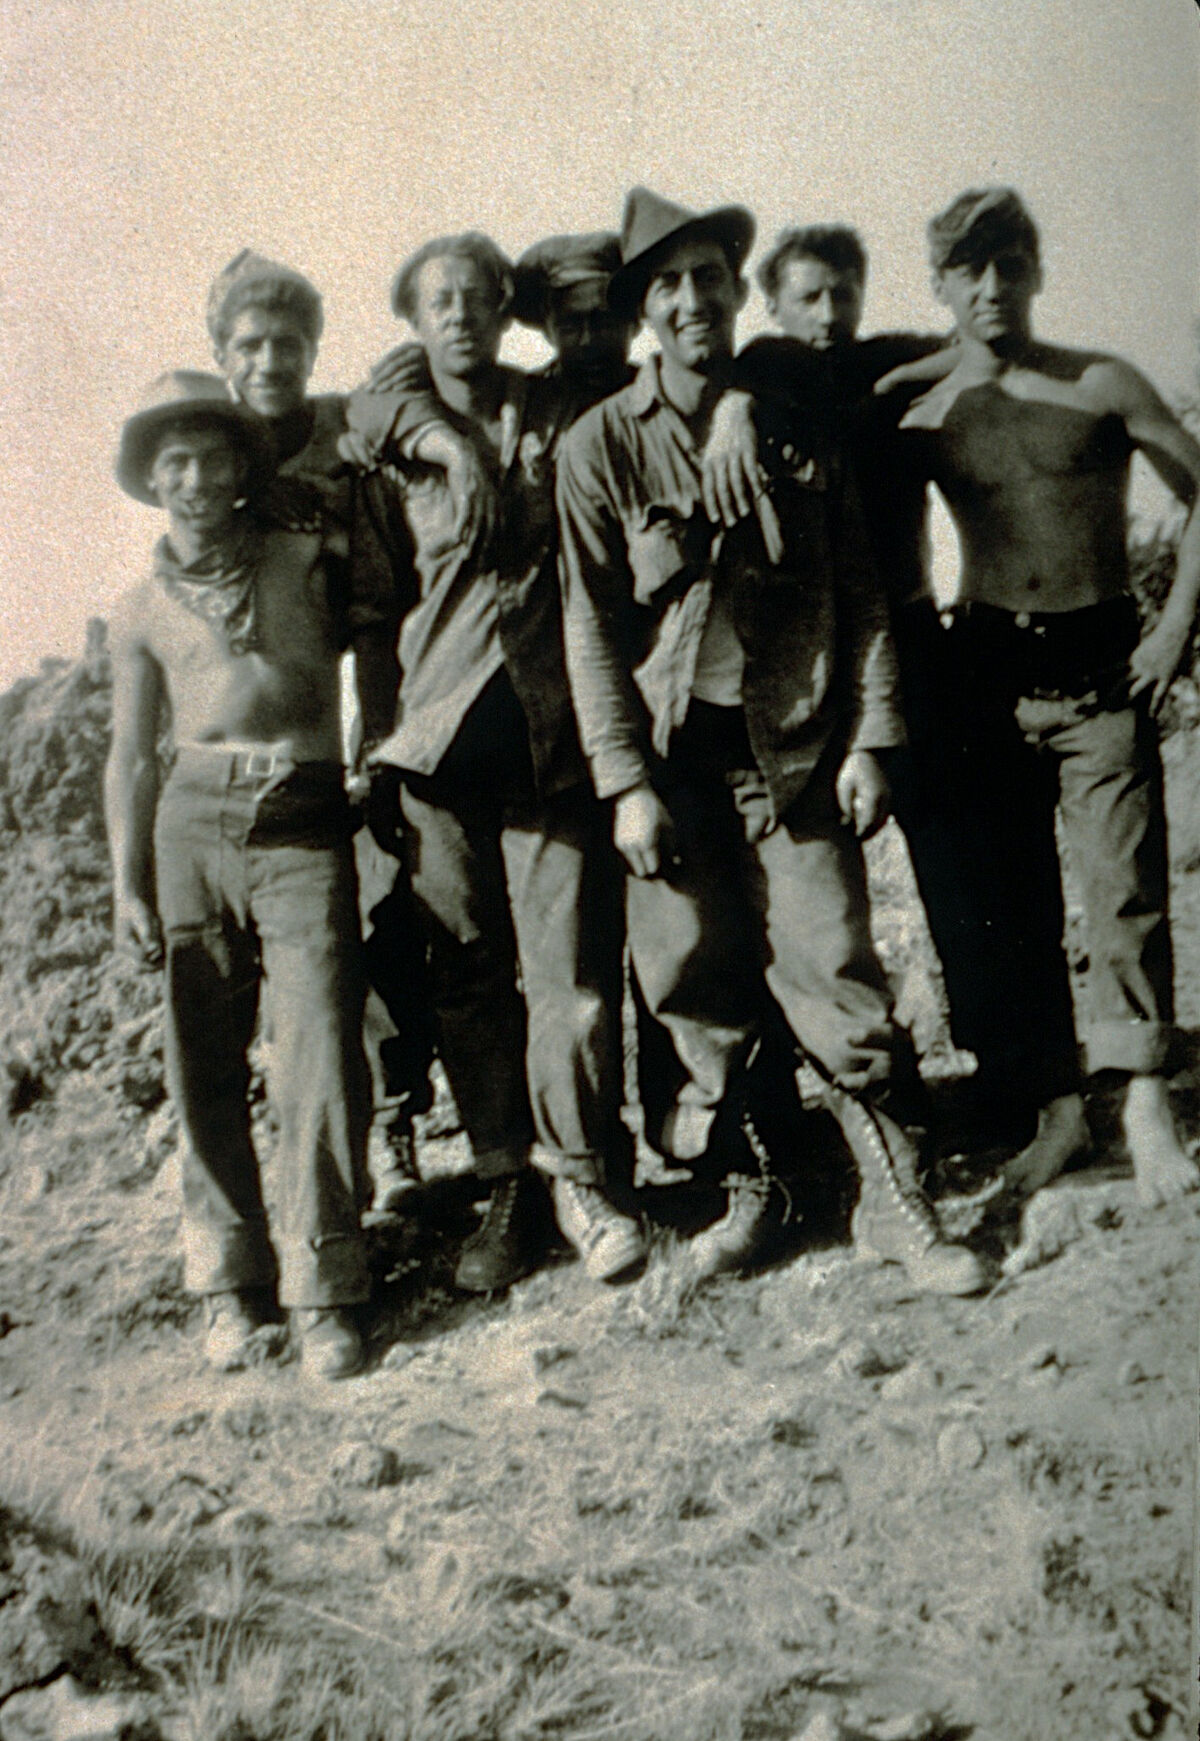 The Imnaha crew of the Civilian Conservation Corps (CCC). Max Gorsline stands fifth from left in a hat. Courtesy of Max Gorsline.